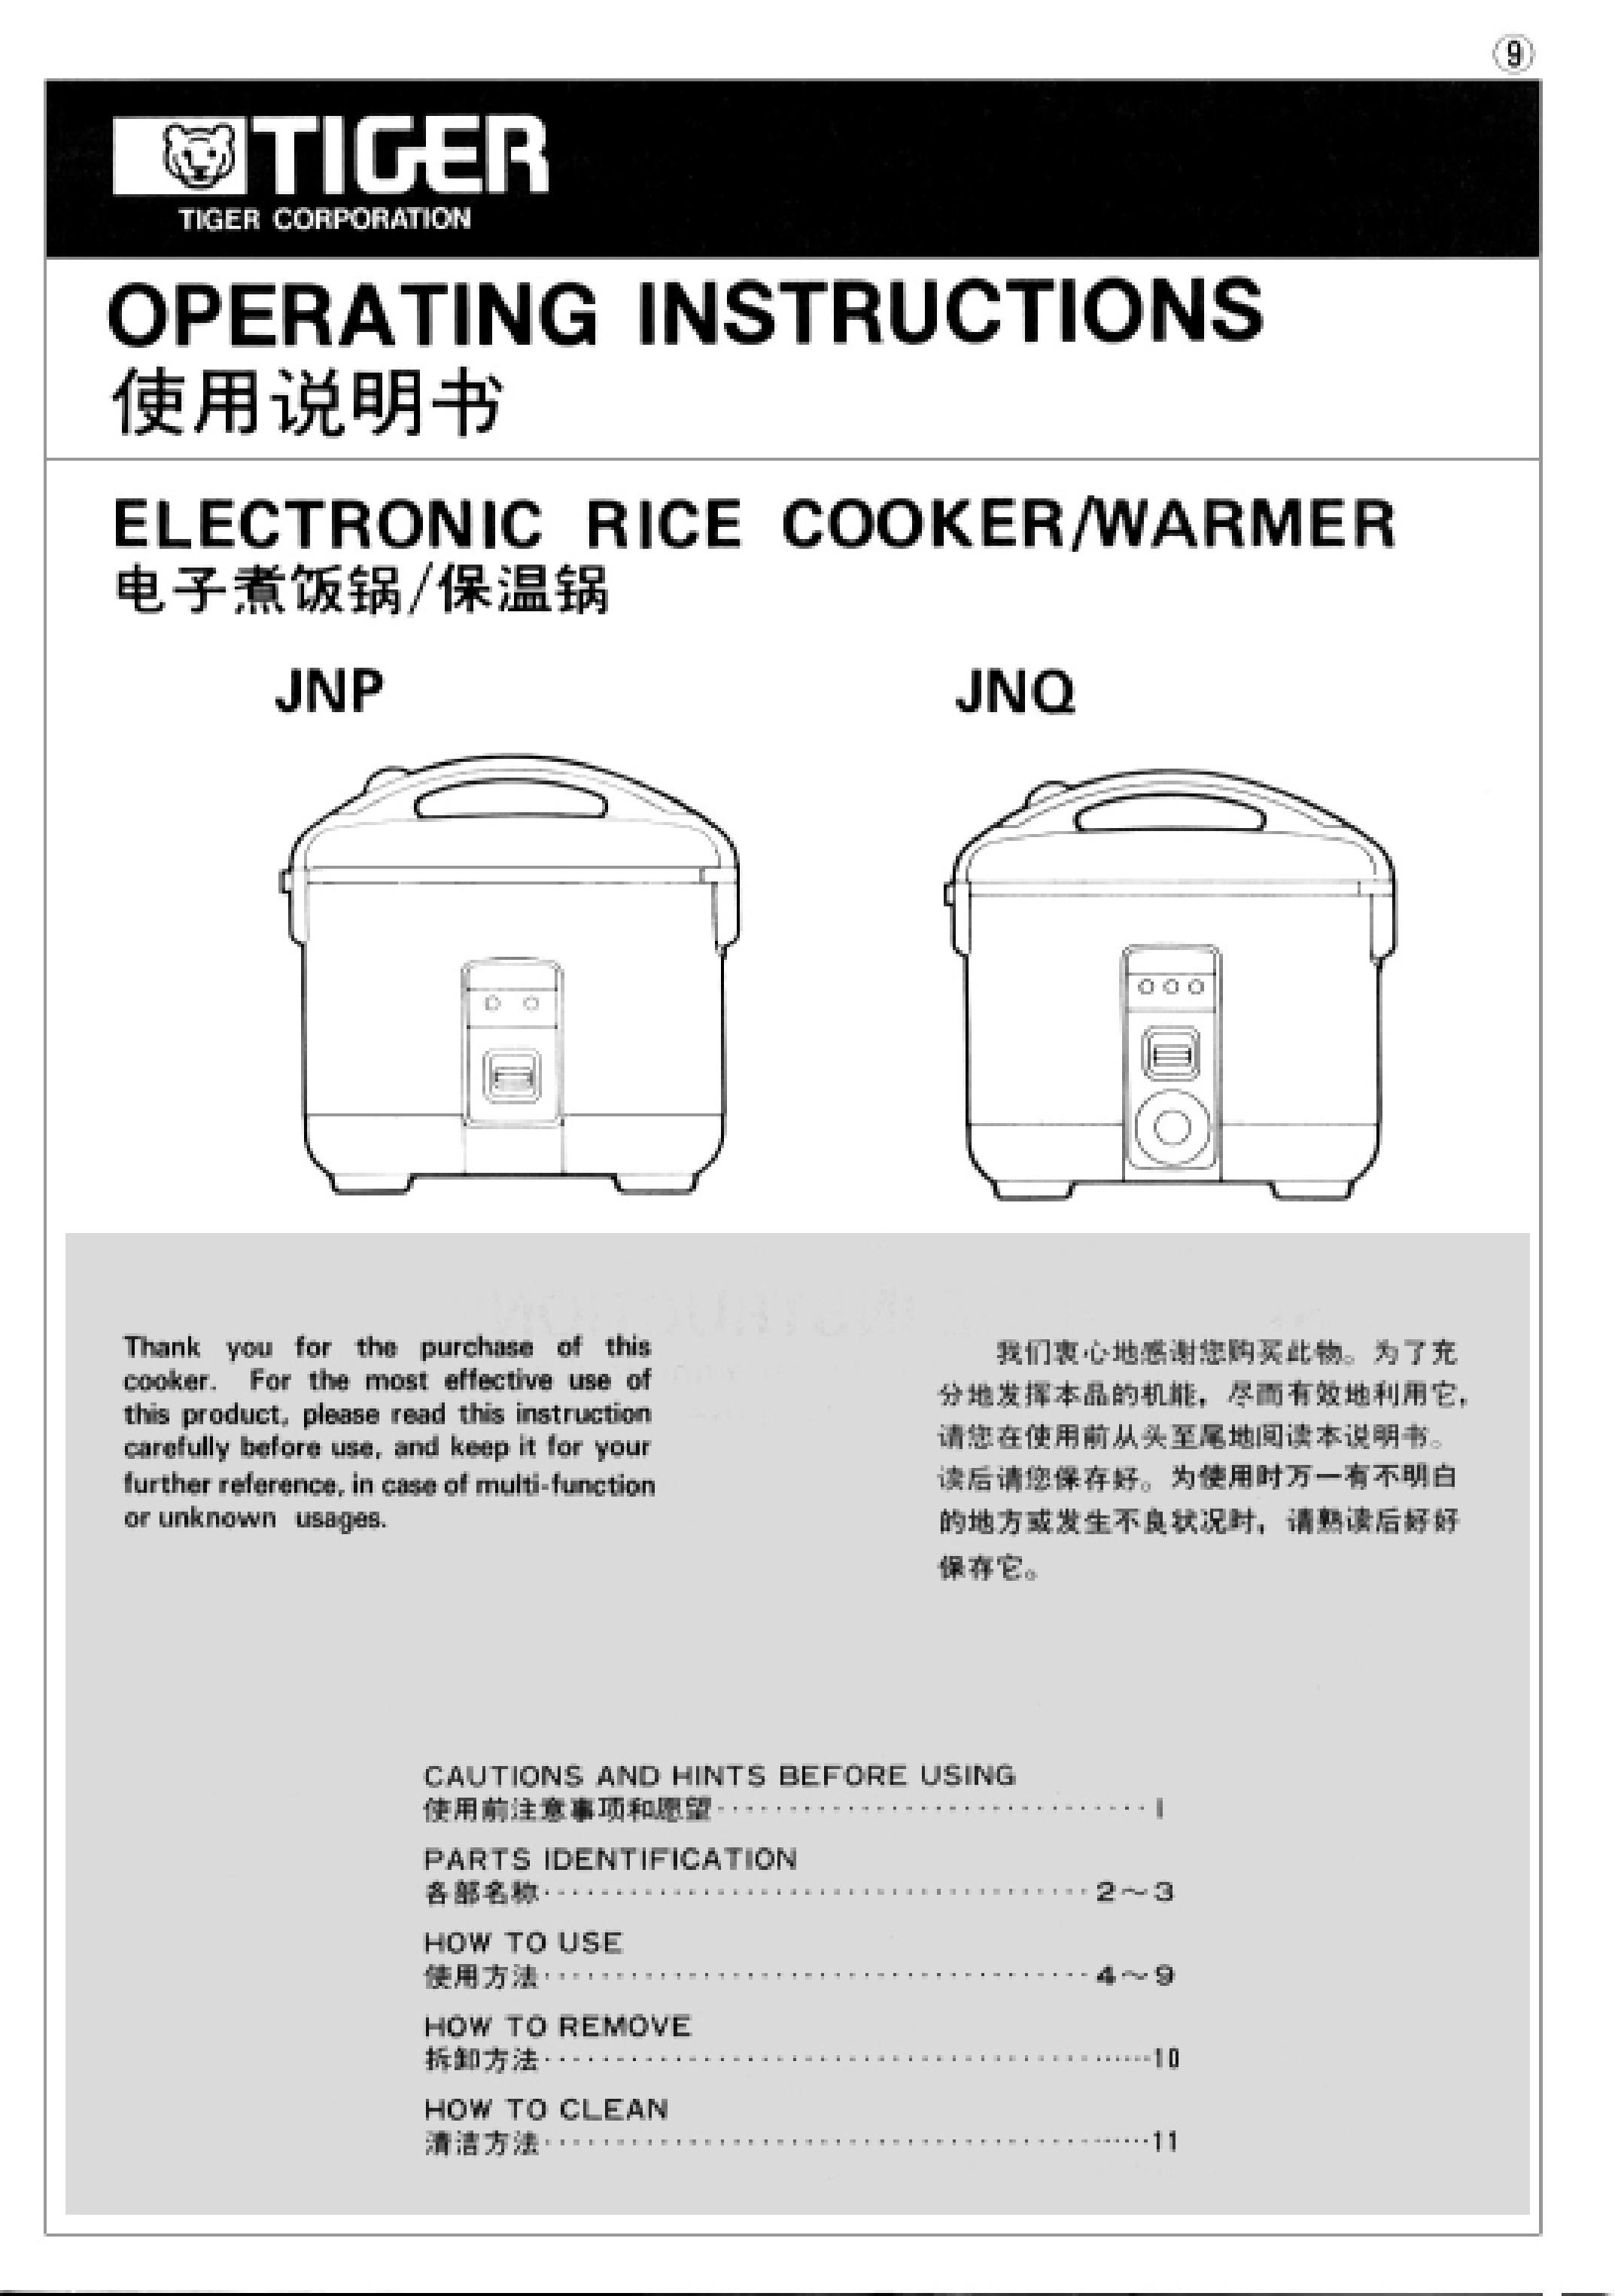 Tiger Products Co., Ltd JNQ Rice Cooker User Manual